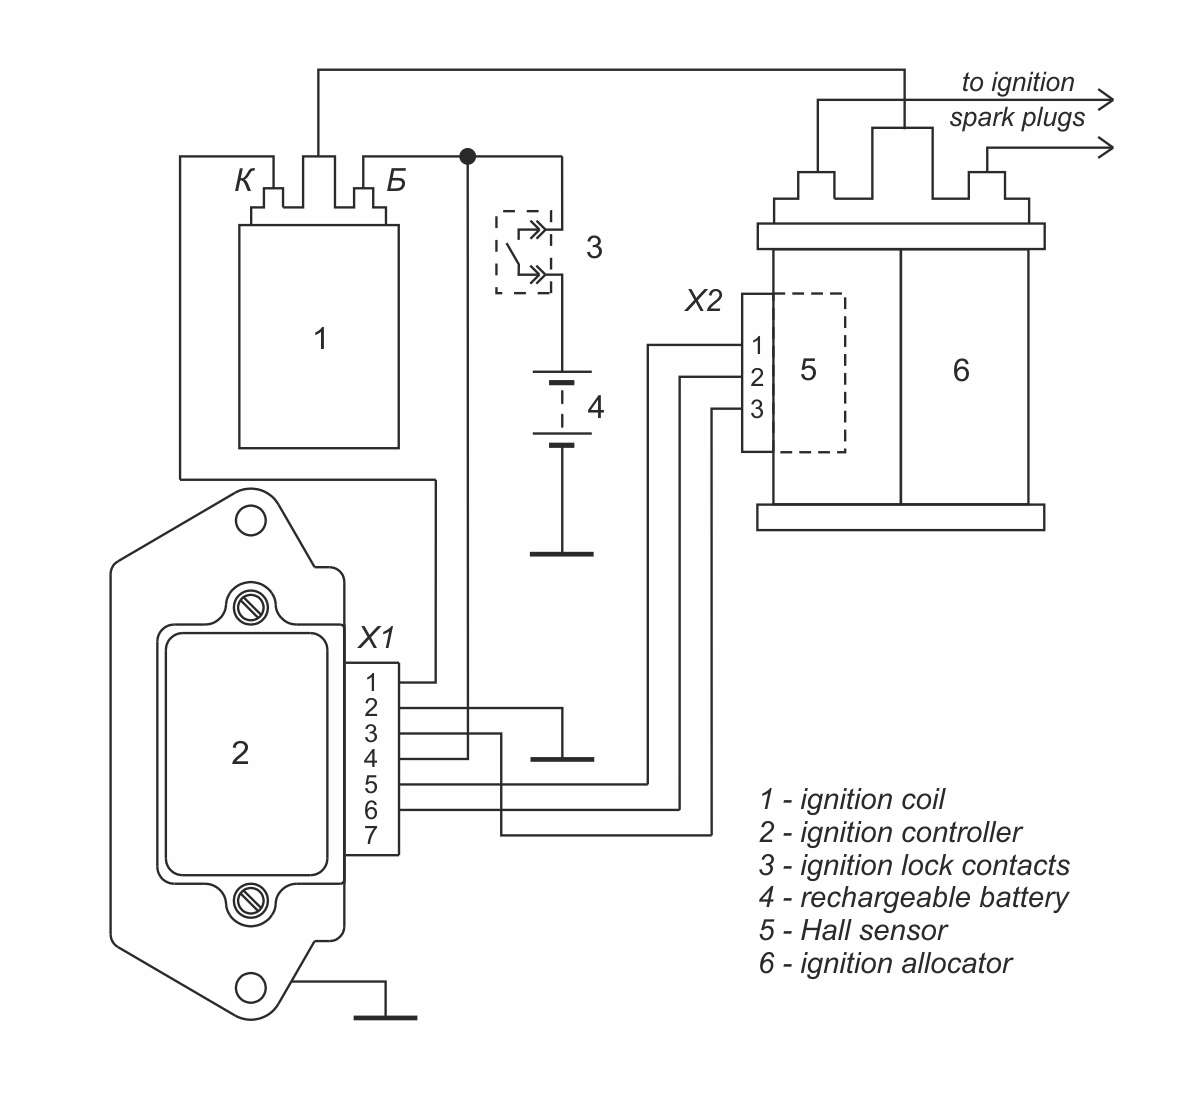 Connection diagram of ignition controller 3620.3734